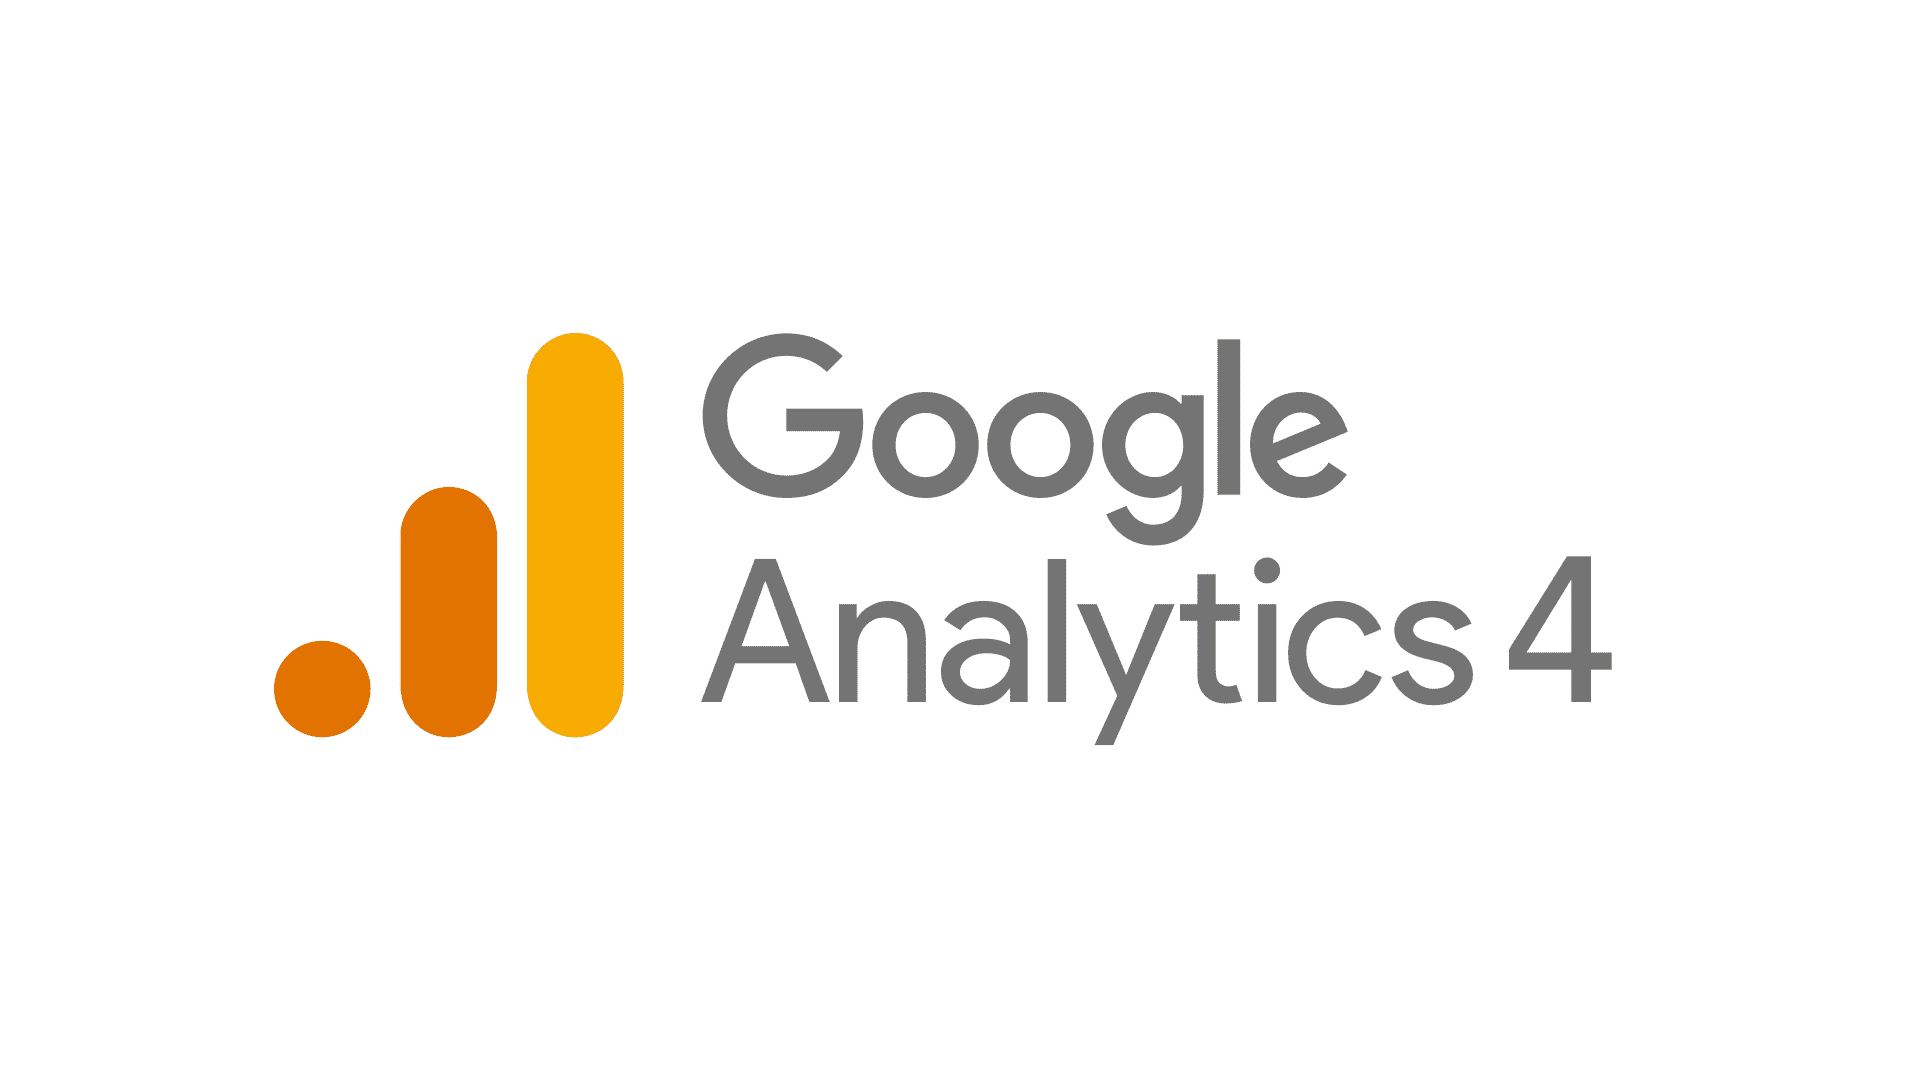 “edit” permissions on the GA property steps in google analytics